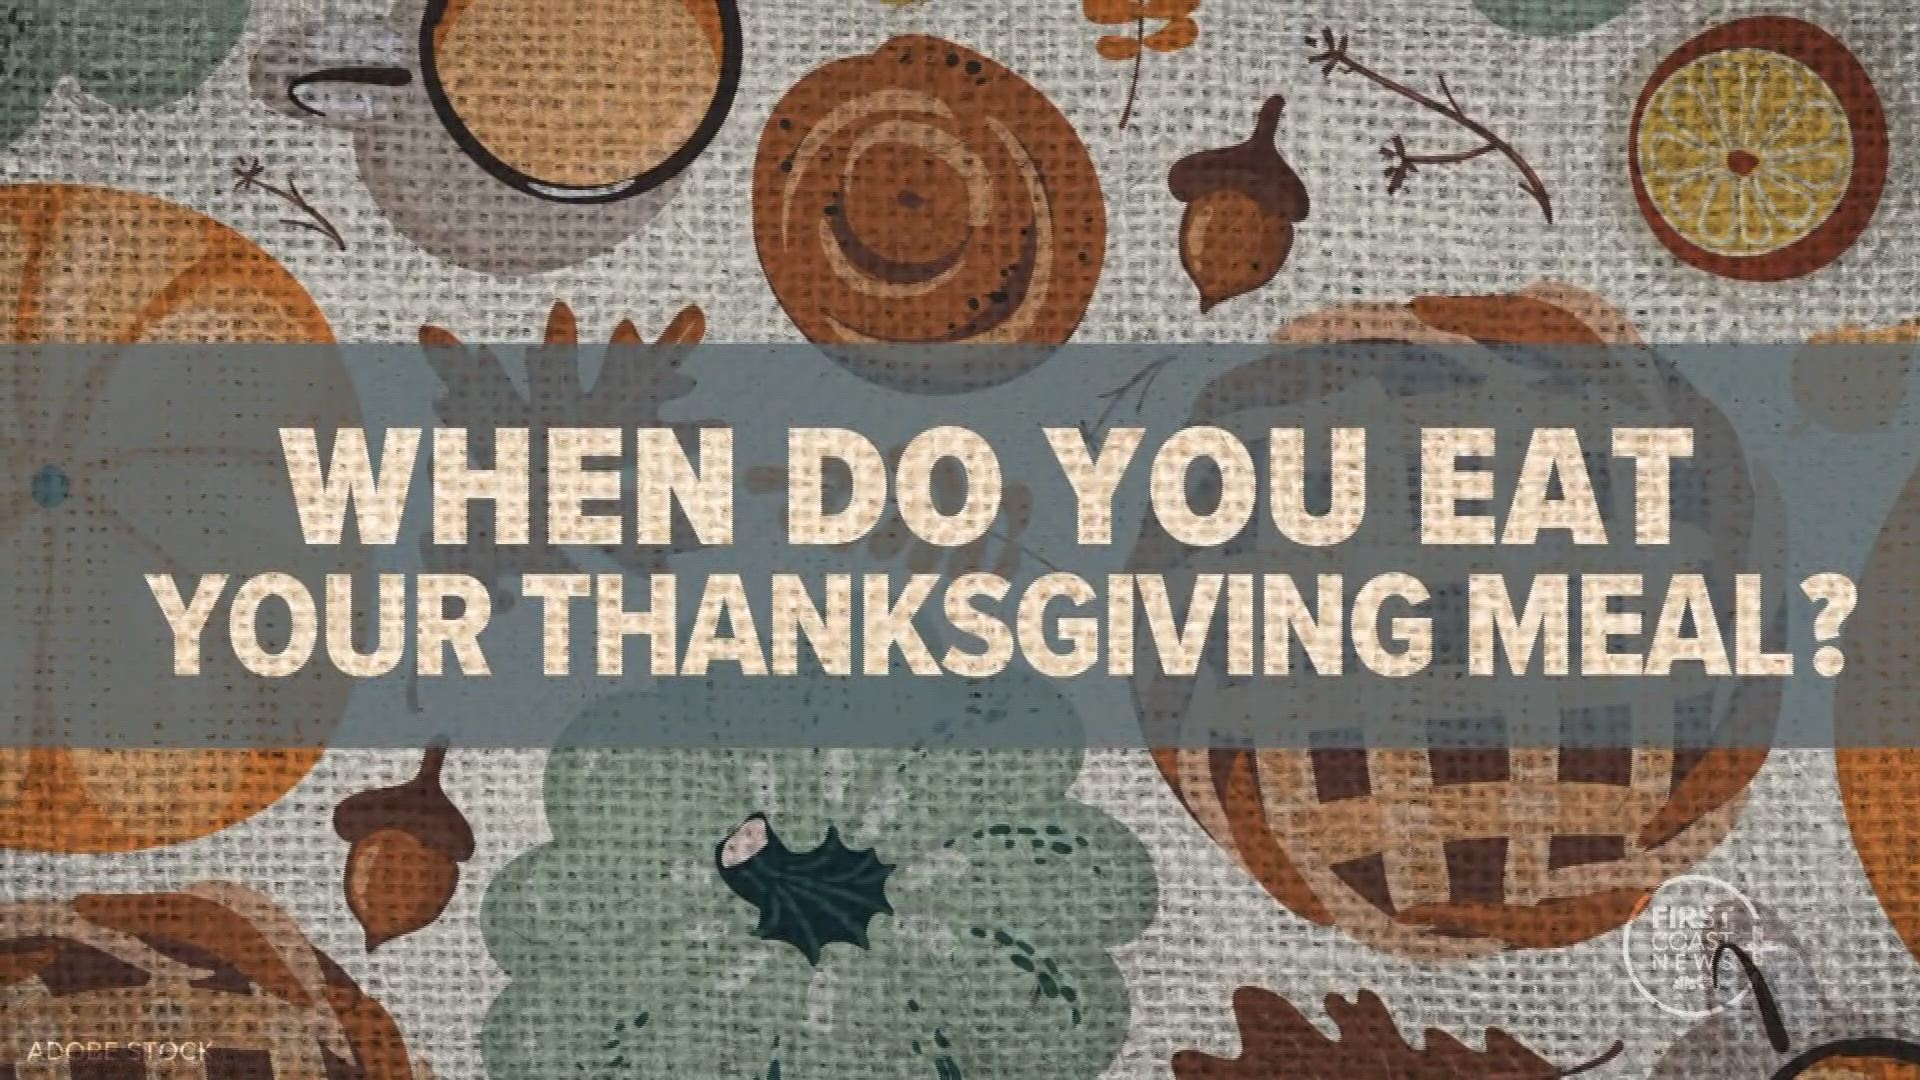 Our team reflects on what they are most thankful for this Thanksgiving.